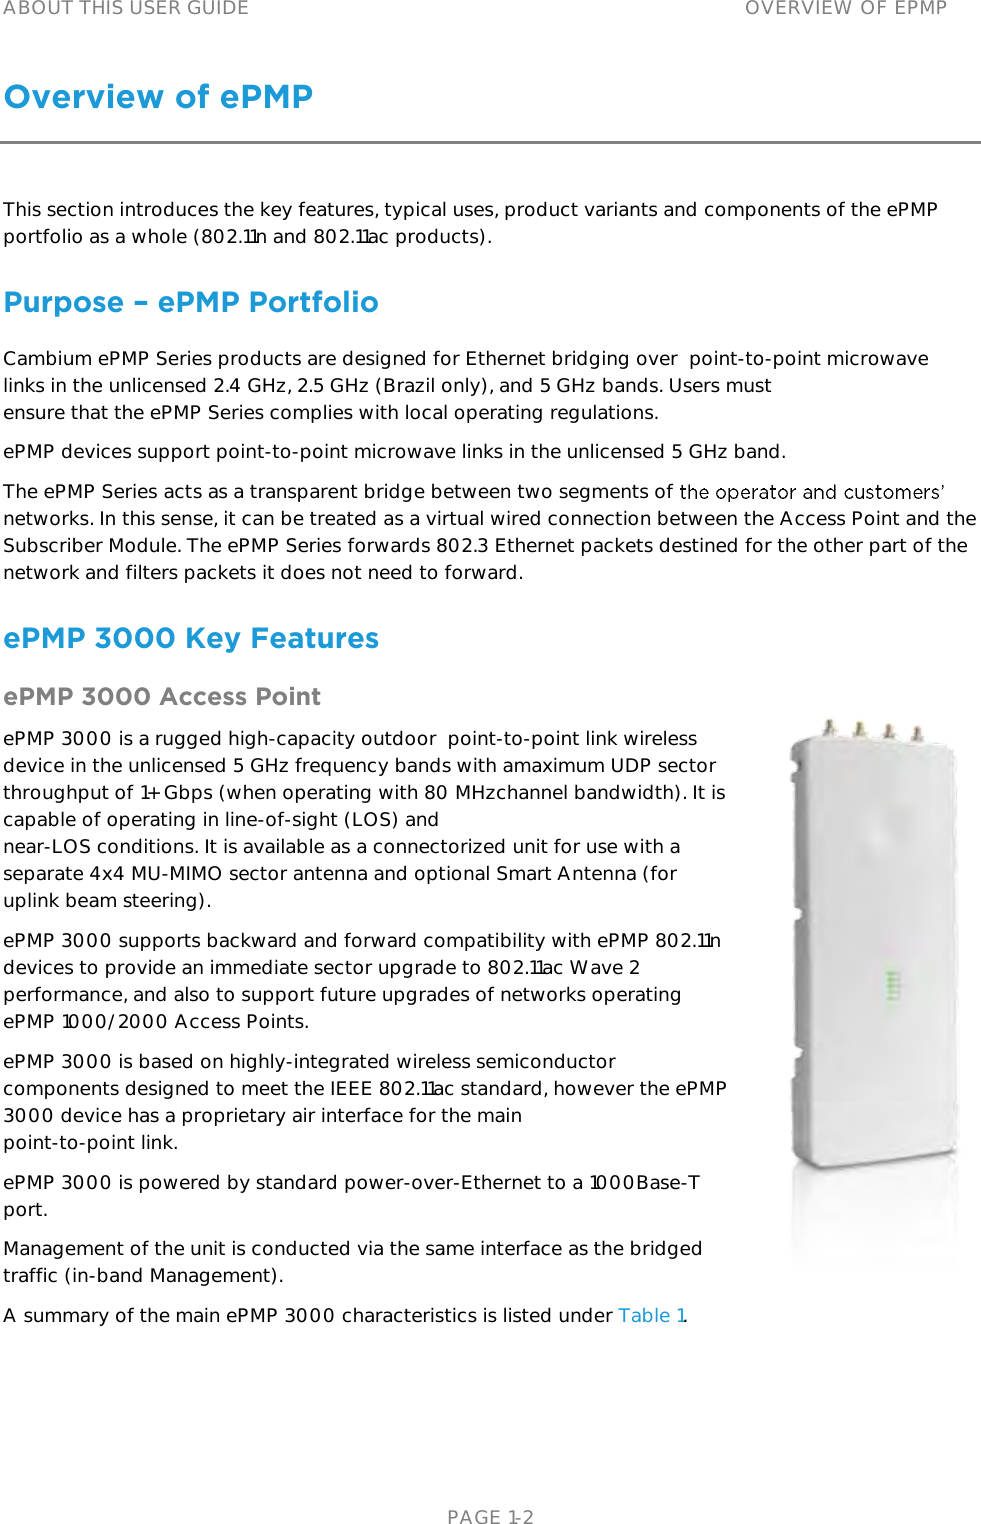 ABOUT THIS USER GUIDE OVERVIEW OF EPMP   PAGE 1-2 Overview of ePMP             This section introduces the key features, typical uses, product variants and components of the ePMPportfolio as a whole (802.11n and 802.11ac products).Purpose – ePMP PortfolioCambium ePMP Series products are designed for Ethernet bridging over  point- to-point microwave links in the unlicensed 2.4 GHz, 2.5 GHz (Brazil only), and 5 GHz bands. Users mustensure that the ePMP Series complies with local operating regulations.ePMP devices support point-to-point microwave links in the unlicensed 5 GHz band. The ePMP Series acts as a transparent bridge between two segments of networks. In this sense, it can be treated as a virtual wired connection between the Access Point and the Subscriber Module. The ePMP Series forwards 802.3 Ethernet packets destined for the other part of the network and filters packets it does not need to forward.  ePMP 3000 Key Features ePMP 3000 Access Point         ePMP 3000 is a rugged high-capacity outdoor  point-to-point link wireless device in the unlicensed 5 GHz frequency bands with amaximum UDP sector throughput of 1+ Gbps (when operating with 80 MHzchannel bandwidth). It is capable of operating in line-of-sight (LOS) andnear-LOS conditions. It is available as a connectorized unit for use with a separate 4x4 MU-MIMO sector antenna and optional Smart Antenna (for uplink beam steering).ePMP 3000 supports backward and forward compatibility with ePMP 802.11n devices to provide an immediate sector upgrade to 802.11ac Wave 2 performance, and also to support future upgrades of networks operating ePMP 1000/2000 Access Points.ePMP 3000 is based on highly-integrated wireless semiconductorcomponents designed to meet the IEEE 802.11ac standard, however the ePMP 3000 device has a proprietary air interface for the mainpoint-to-point link.ePMP 3000 is powered by standard power-over-Ethernet to a 1000Base-Tport.Management of the unit is conducted via the same interface as the bridgedtraffic (in-band Management).A summary of the main ePMP 3000 characteristics is listed under Table 1. 